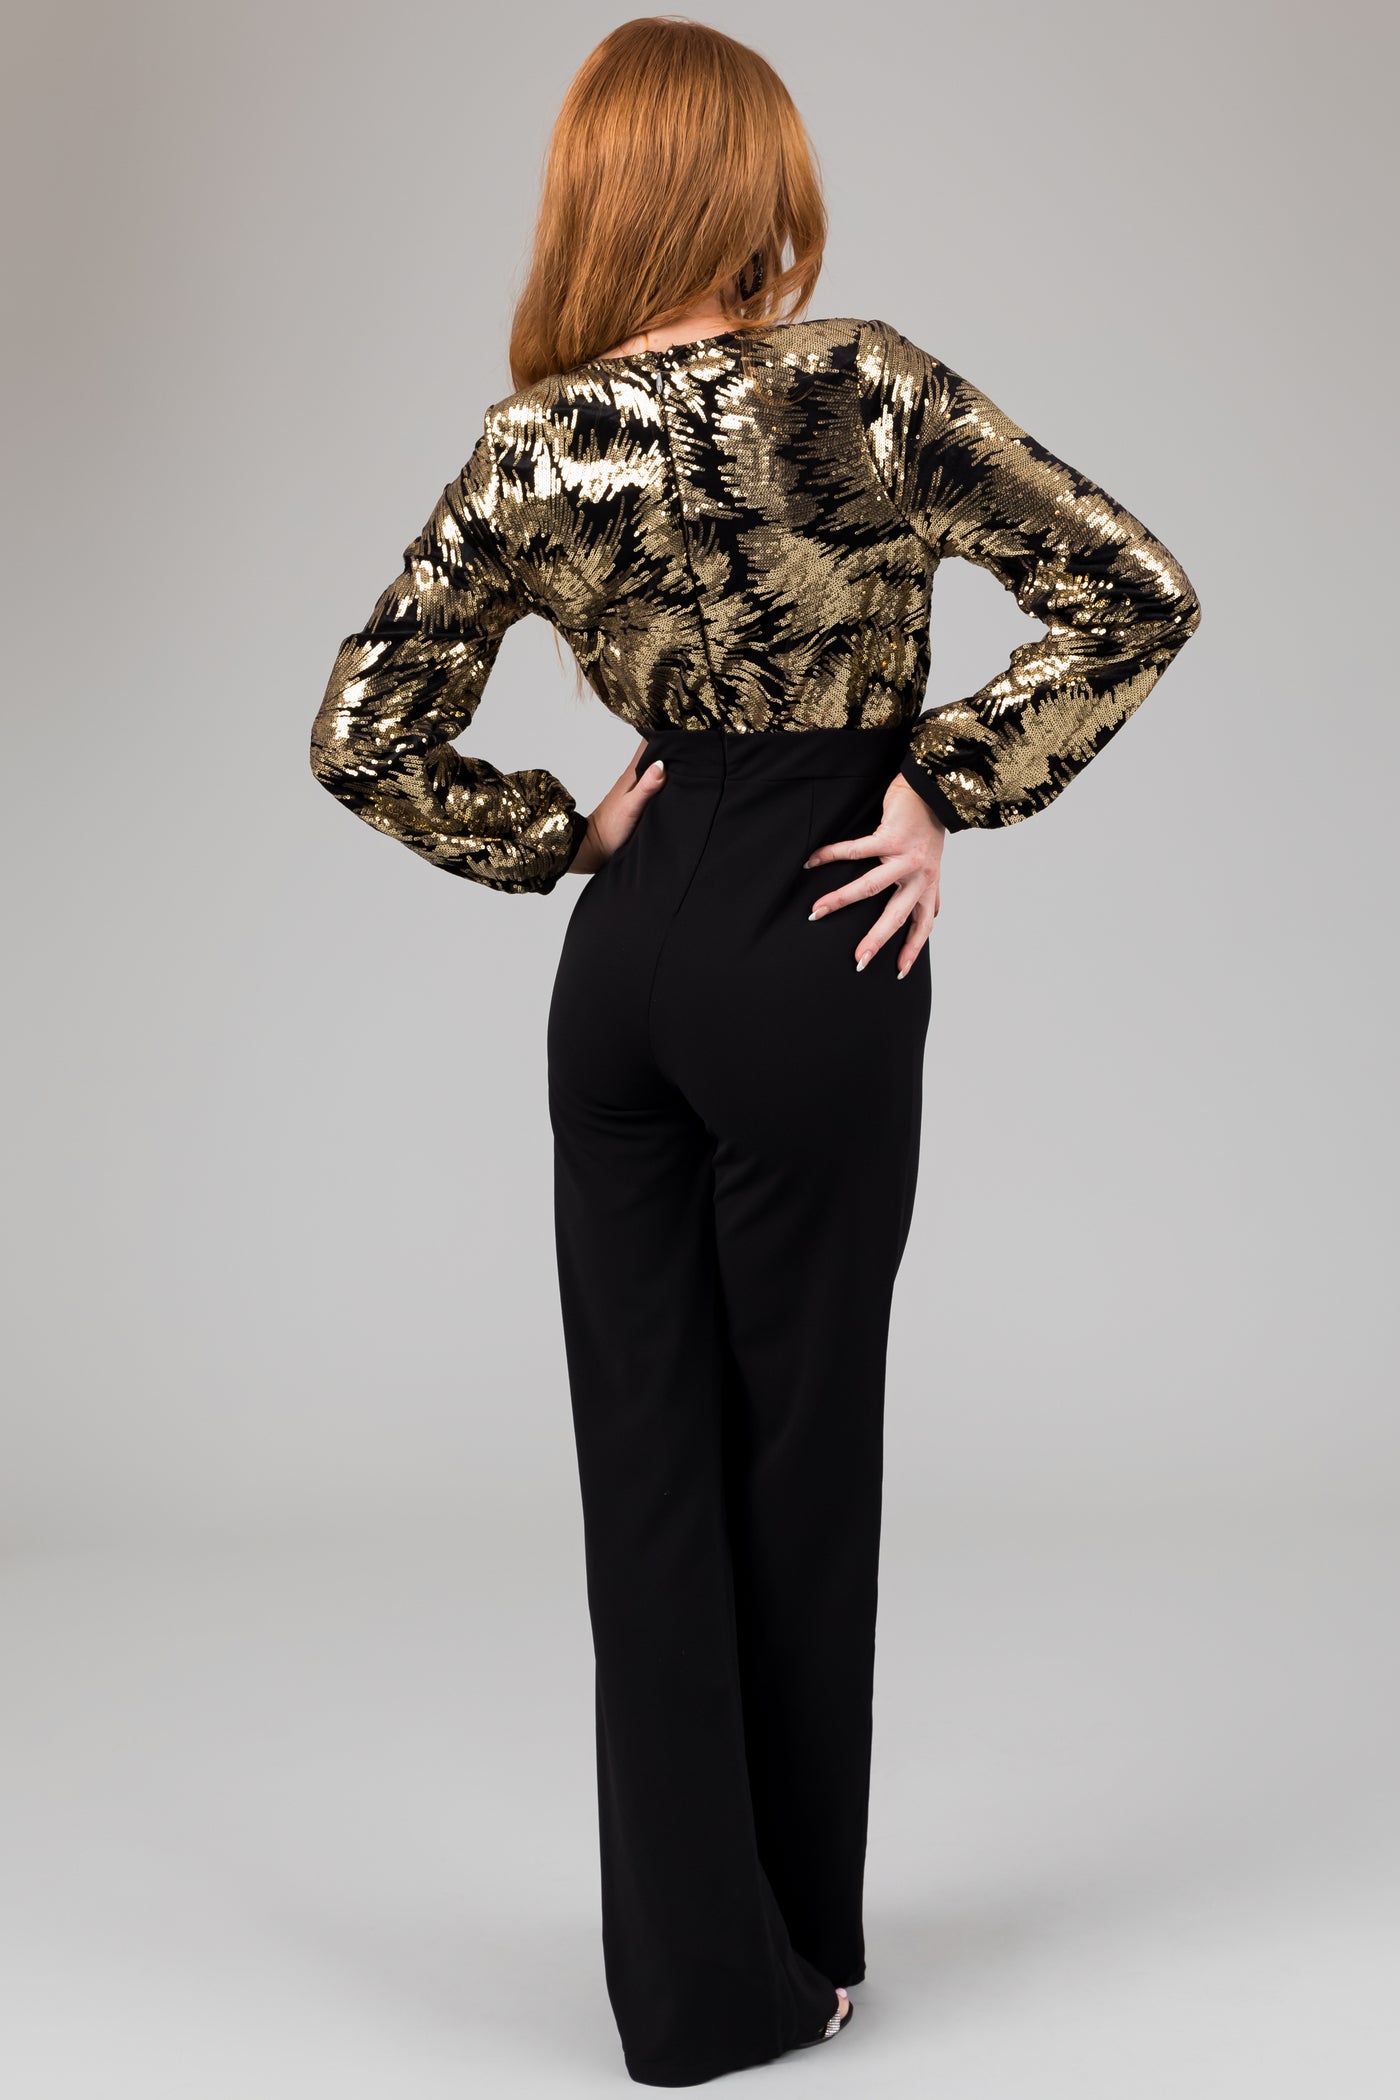 Black and Gold Sequin Long Sleeve Jumpsuit